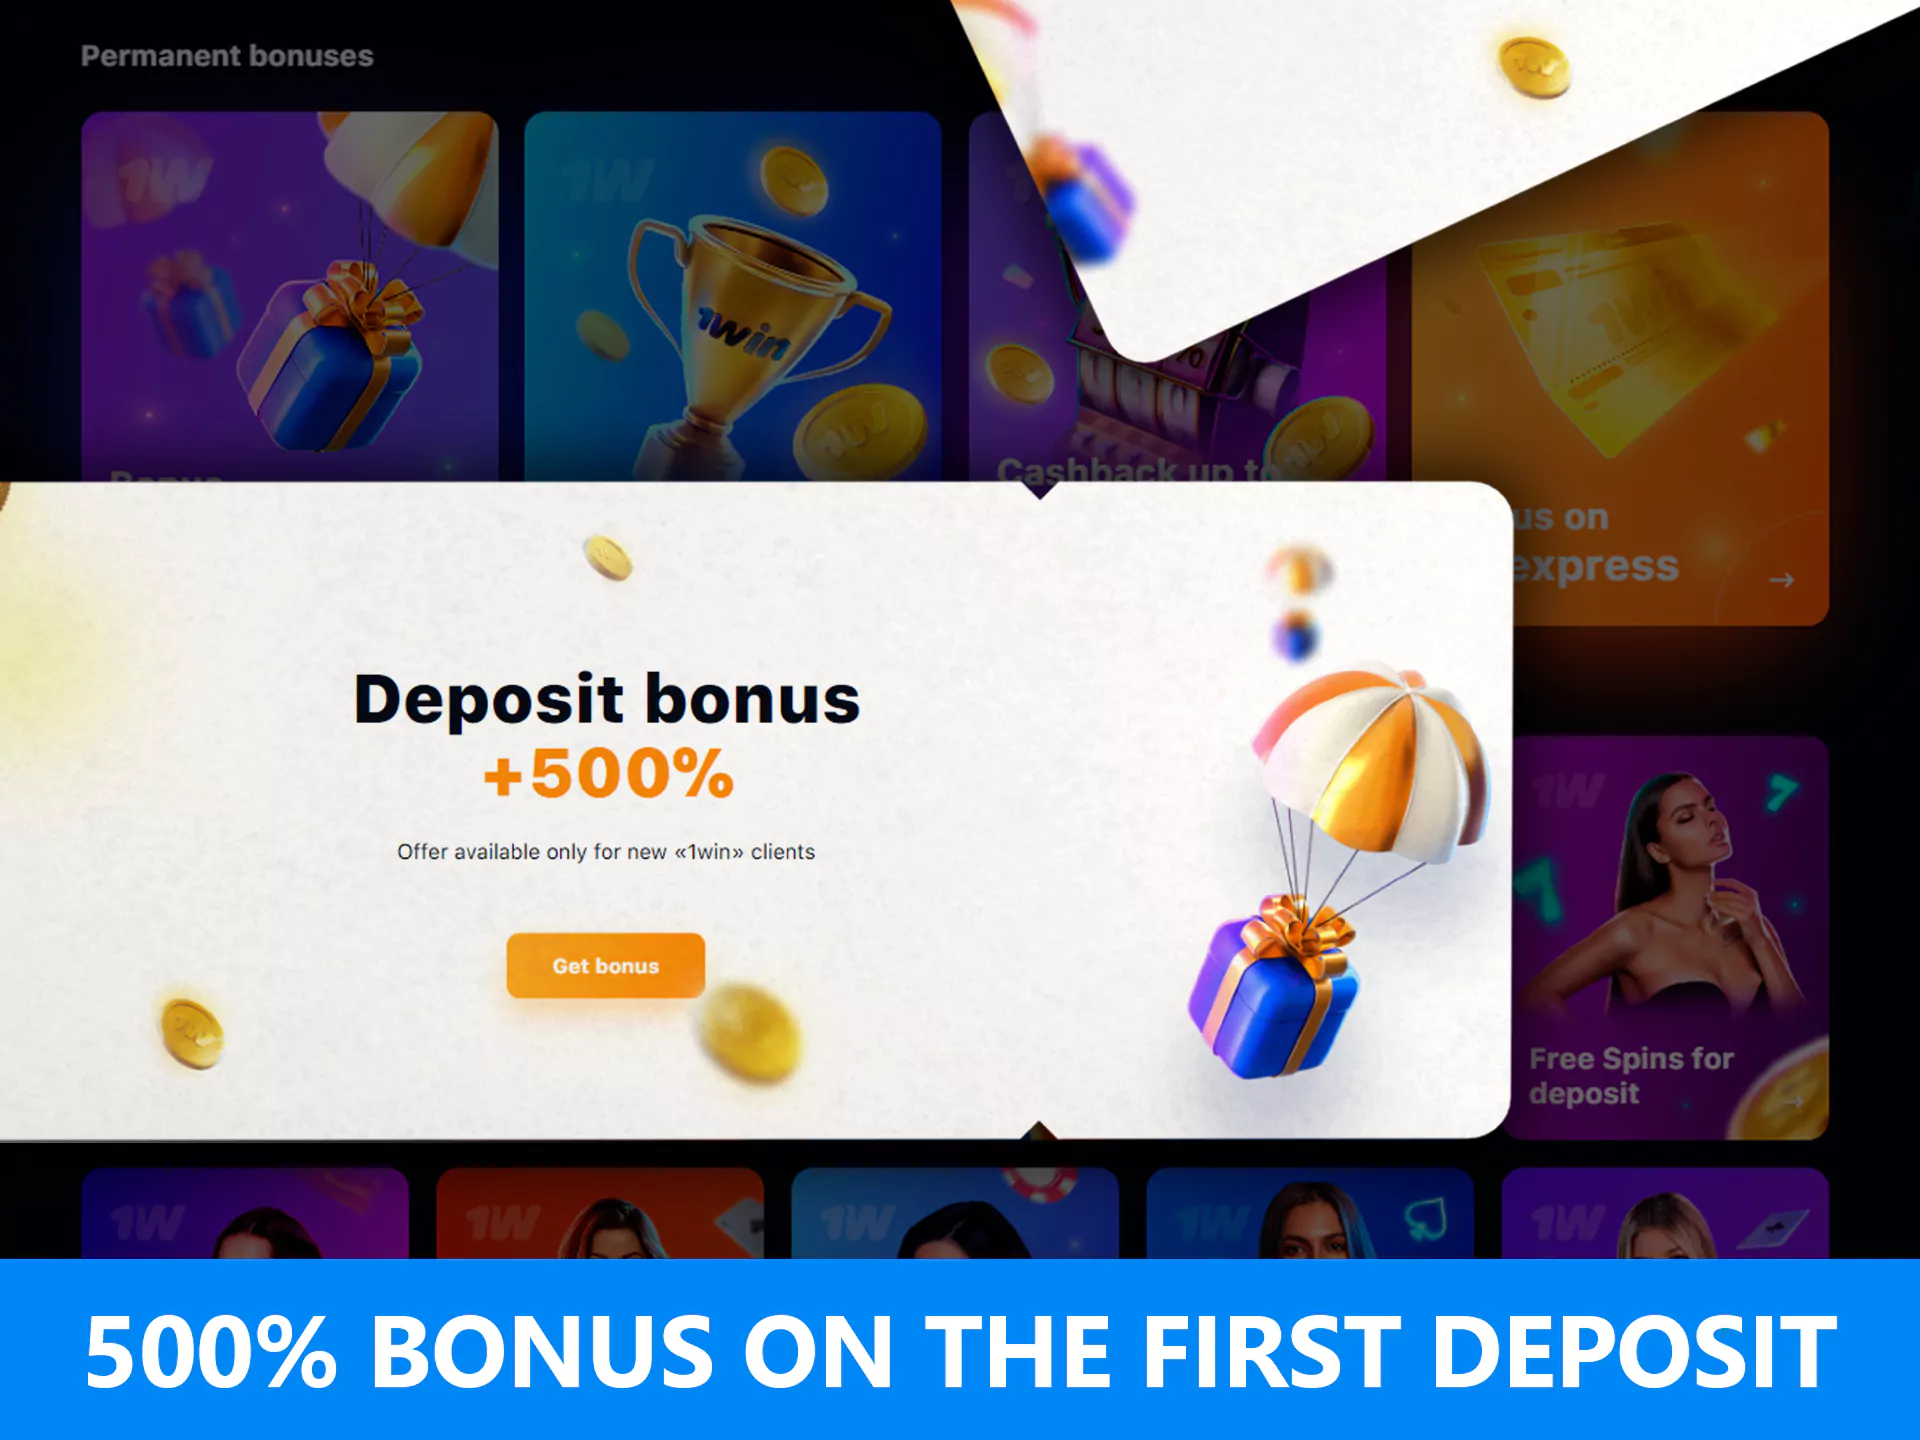 According to the welcome offer, you will get a bonus after your first deposit.